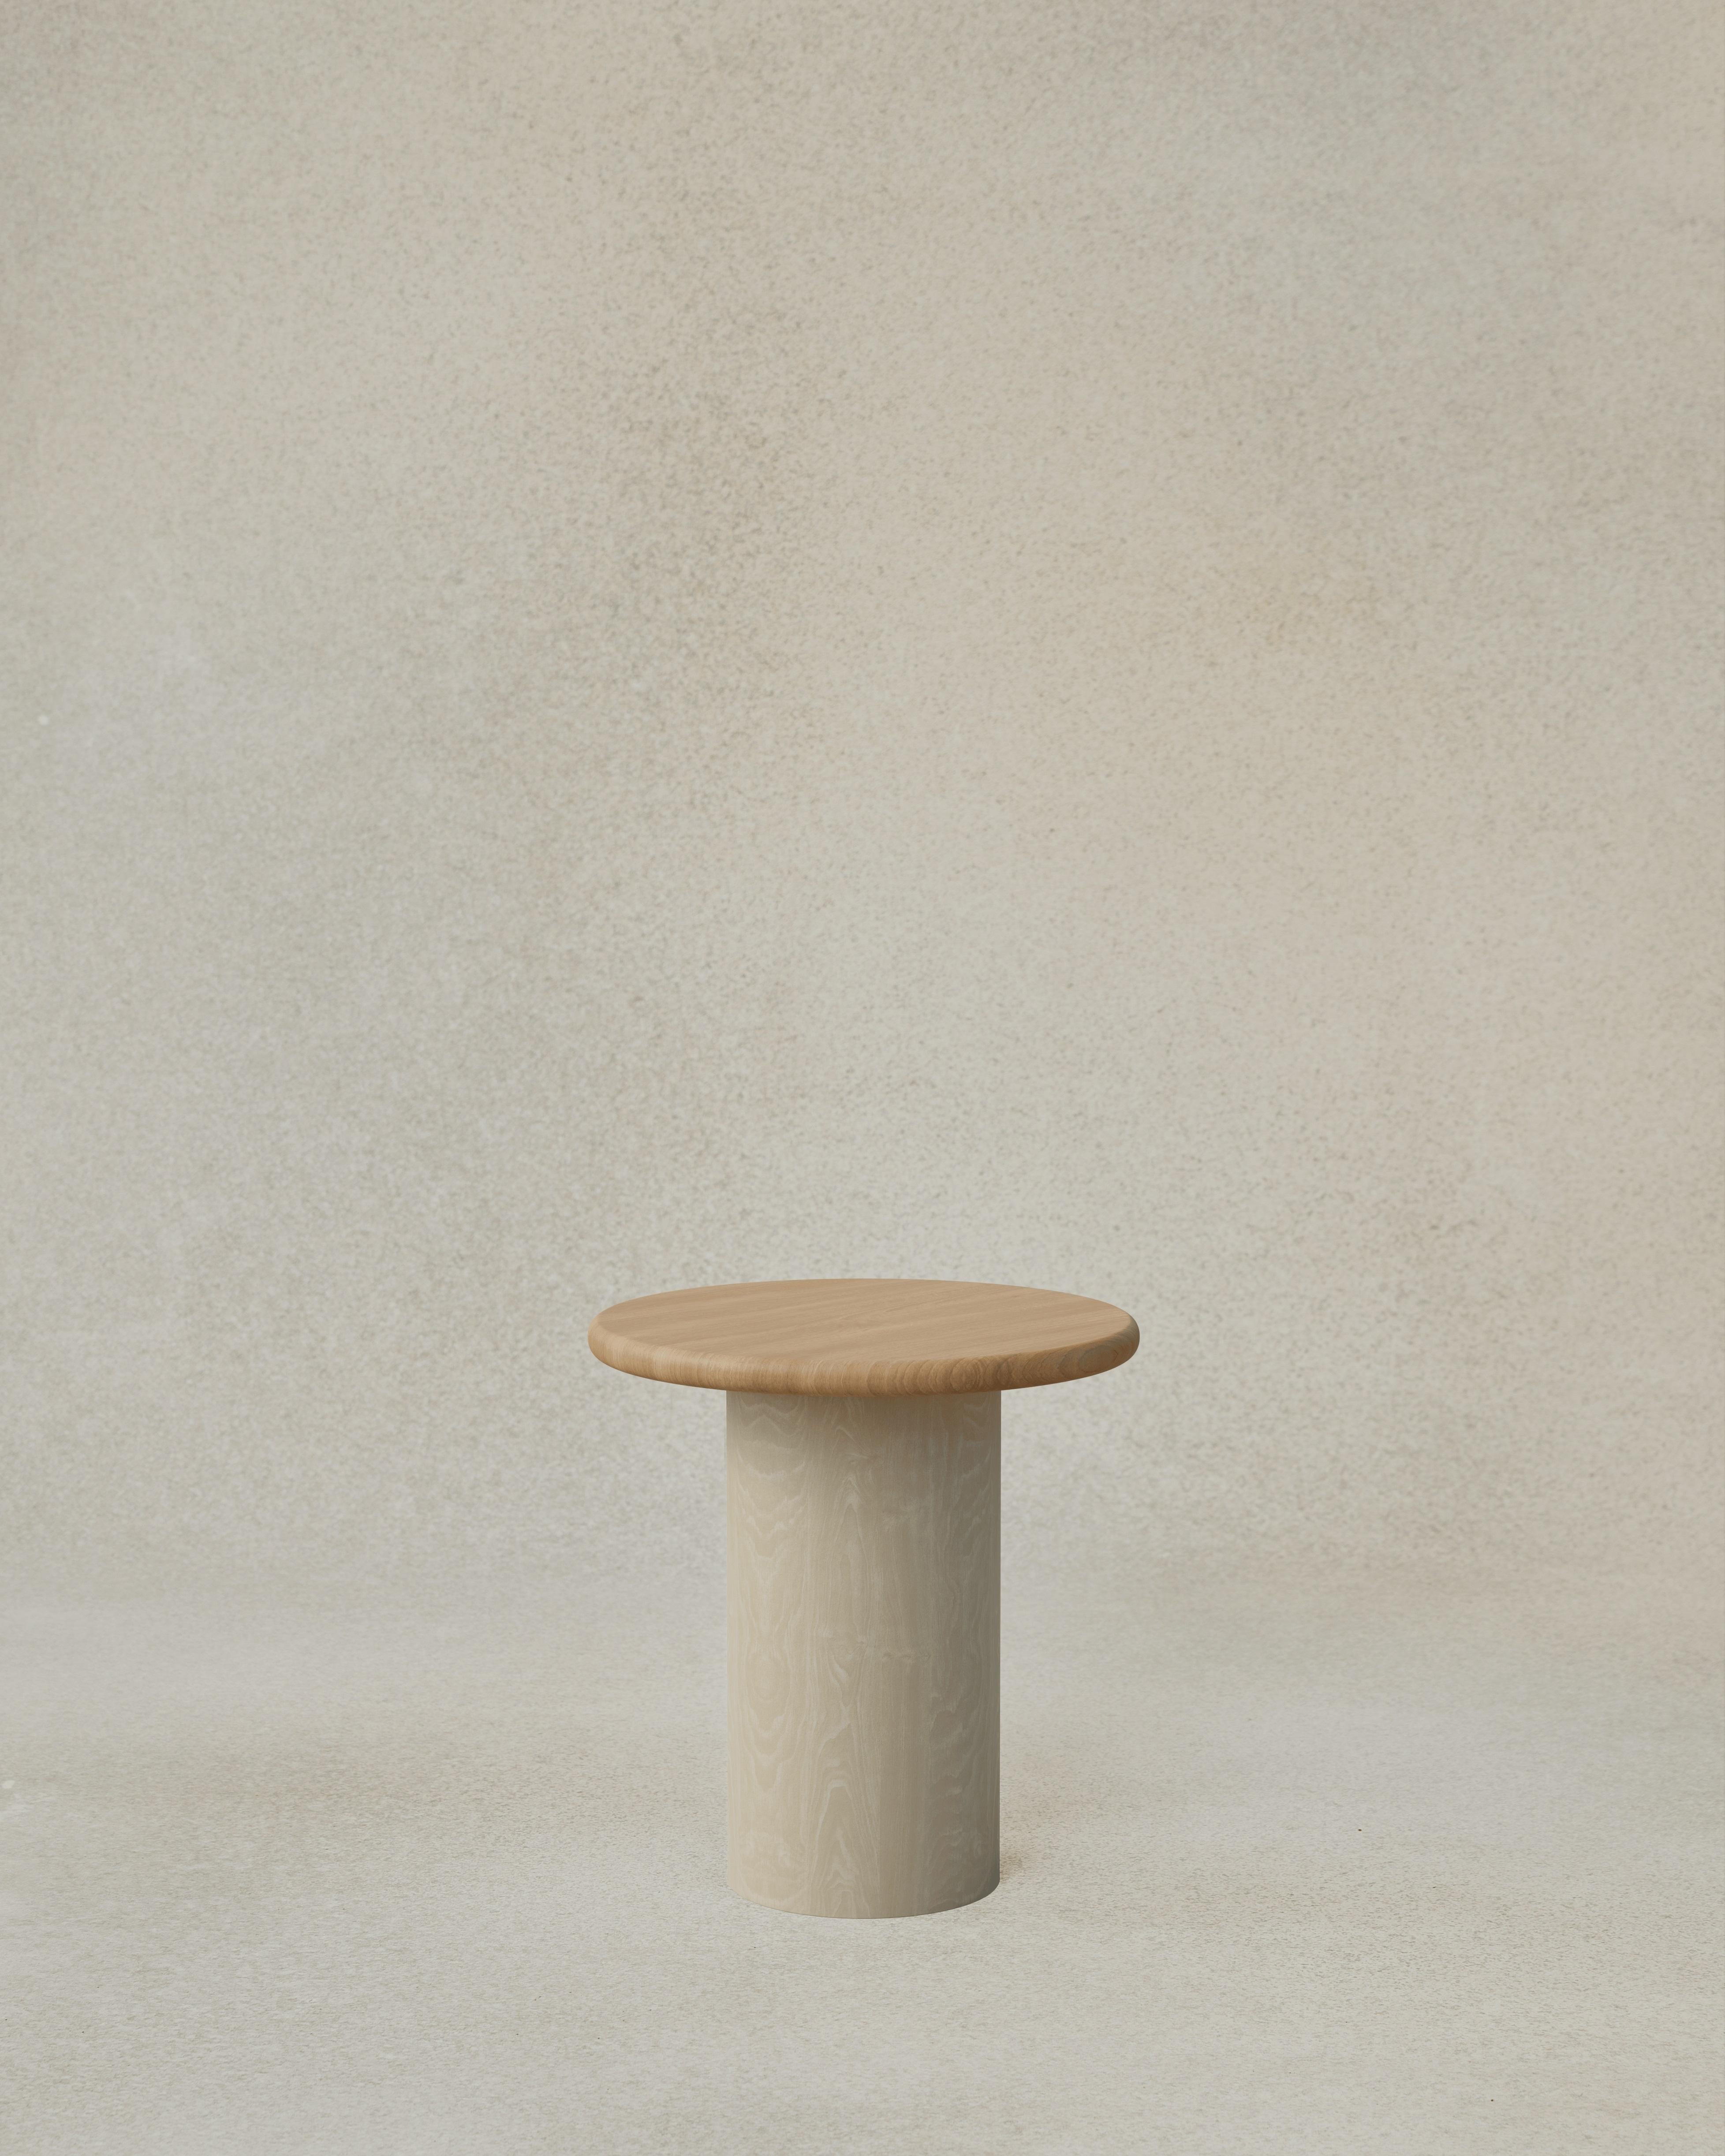 The Raindrop 400 is the second to smallest side table, perfect to pair with a 800 or 1000 Raindrop, and now available in a range of finishes to suit any interior or style. The raindrops nestle together to form a cascading series of tables in height